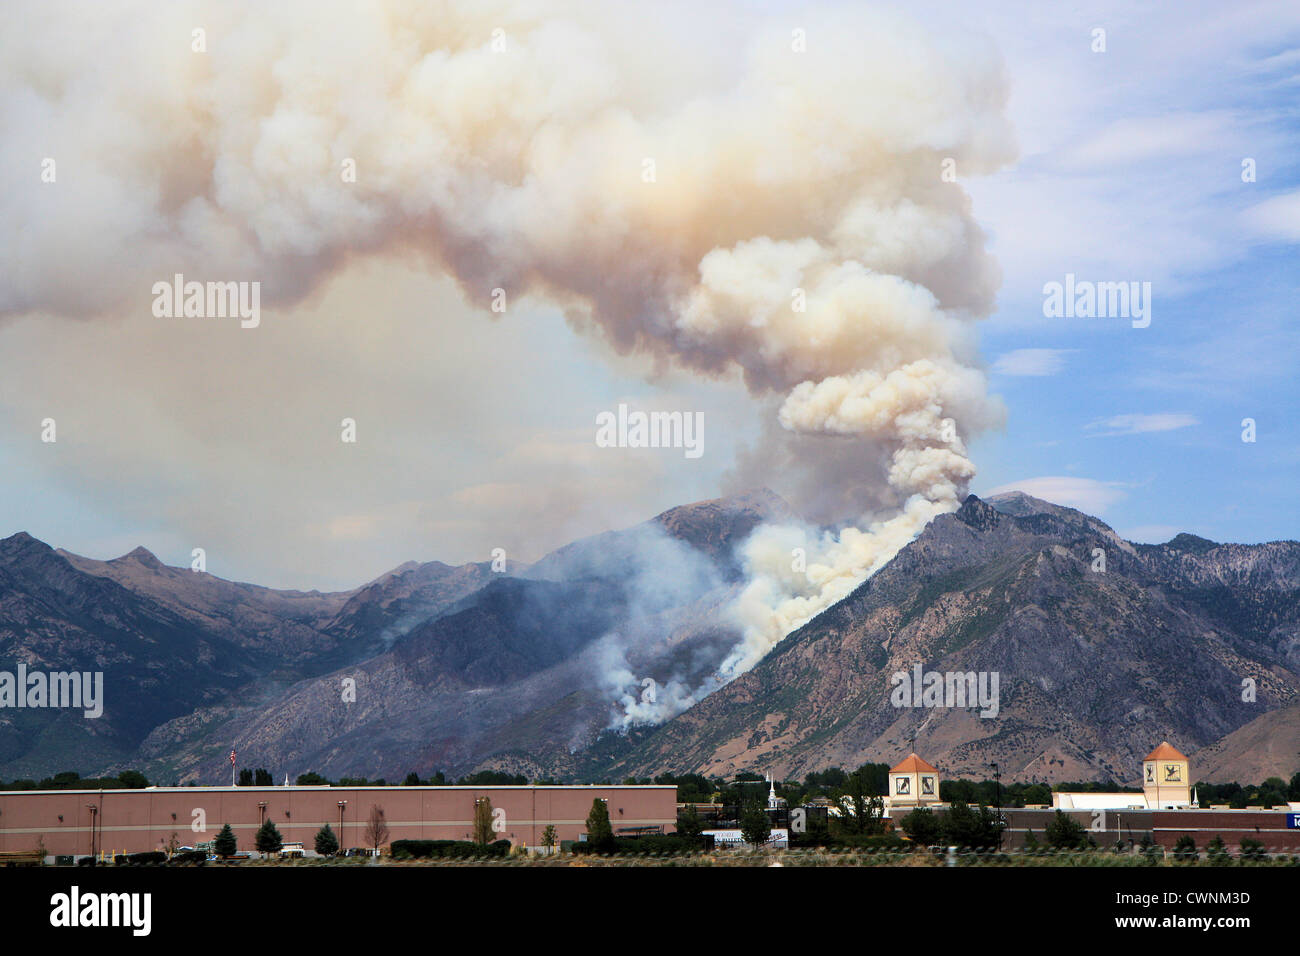 Forest fire on the 4th of july 2012, in Alpine, view from Lindon - interstate 15, Utah, USA Stock Photo